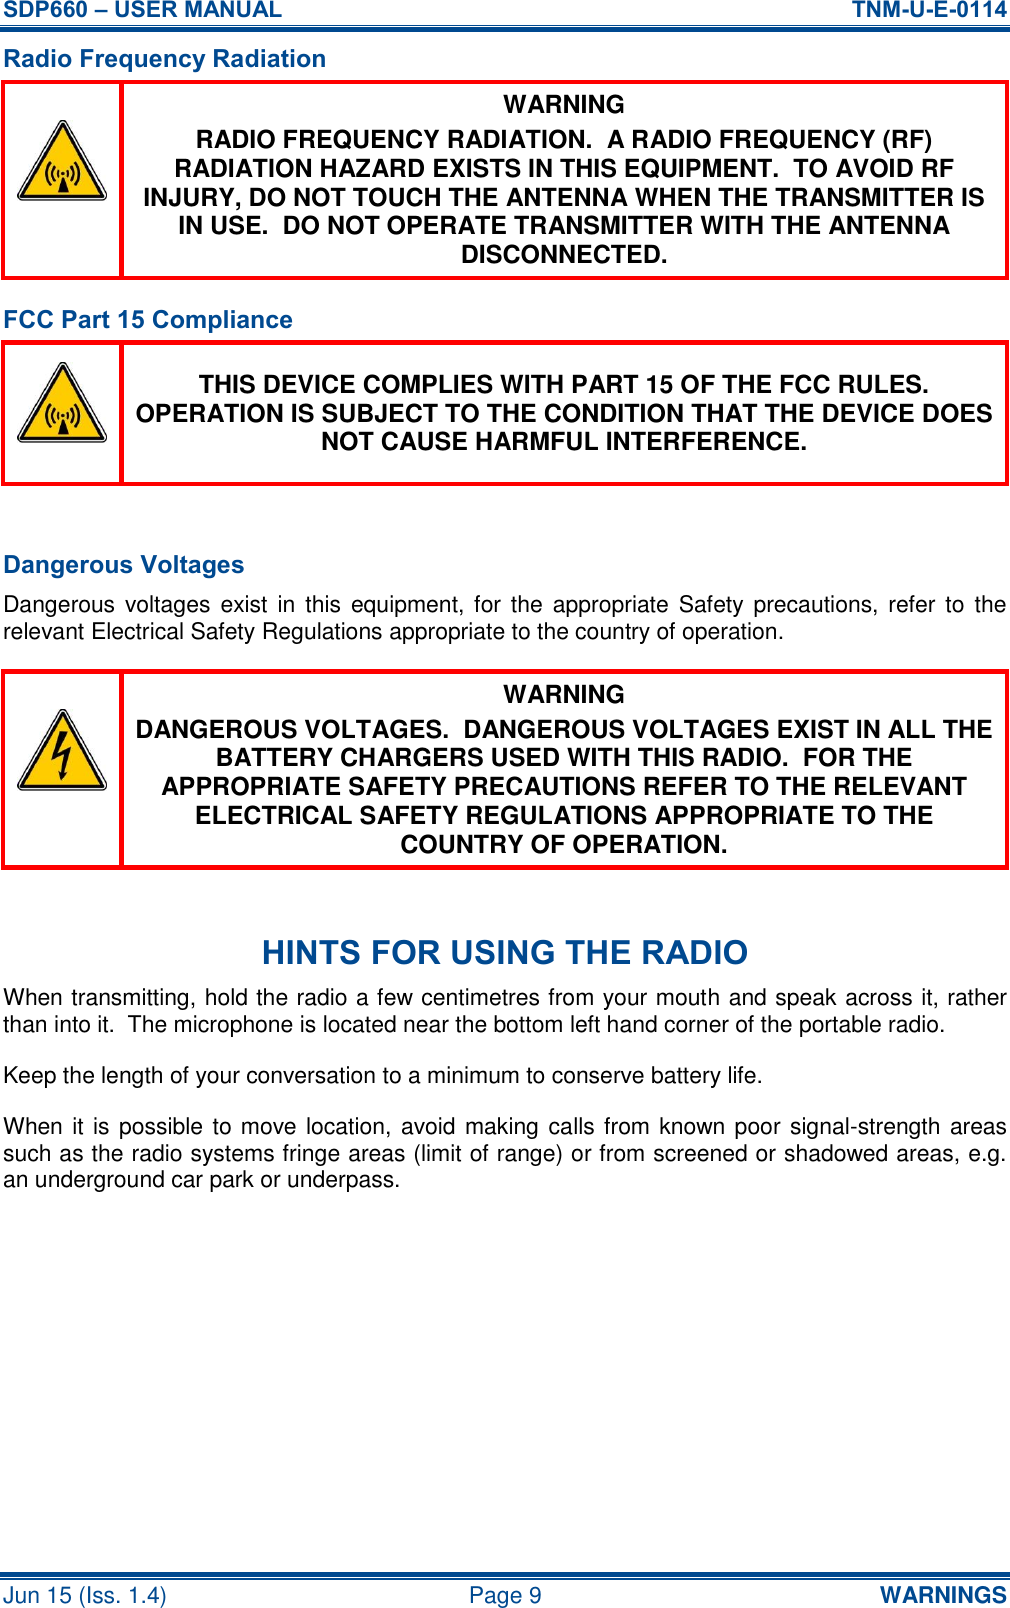 SDP660 – USER MANUAL  TNM-U-E-0114 Jun 15 (Iss. 1.4)  Page 9  WARNINGS Radio Frequency Radiation  WARNING RADIO FREQUENCY RADIATION.  A RADIO FREQUENCY (RF) RADIATION HAZARD EXISTS IN THIS EQUIPMENT.  TO AVOID RF INJURY, DO NOT TOUCH THE ANTENNA WHEN THE TRANSMITTER IS IN USE.  DO NOT OPERATE TRANSMITTER WITH THE ANTENNA DISCONNECTED. FCC Part 15 Compliance  THIS DEVICE COMPLIES WITH PART 15 OF THE FCC RULES.  OPERATION IS SUBJECT TO THE CONDITION THAT THE DEVICE DOES NOT CAUSE HARMFUL INTERFERENCE.  Dangerous Voltages Dangerous voltages exist  in this  equipment, for the appropriate Safety precautions, refer to the relevant Electrical Safety Regulations appropriate to the country of operation.  WARNING DANGEROUS VOLTAGES.  DANGEROUS VOLTAGES EXIST IN ALL THE BATTERY CHARGERS USED WITH THIS RADIO.  FOR THE APPROPRIATE SAFETY PRECAUTIONS REFER TO THE RELEVANT ELECTRICAL SAFETY REGULATIONS APPROPRIATE TO THE COUNTRY OF OPERATION.  HINTS FOR USING THE RADIO When transmitting, hold the radio a few centimetres from your mouth and speak across it, rather than into it.  The microphone is located near the bottom left hand corner of the portable radio. Keep the length of your conversation to a minimum to conserve battery life. When it is possible to move location, avoid making calls from known poor signal-strength areas such as the radio systems fringe areas (limit of range) or from screened or shadowed areas, e.g. an underground car park or underpass.    